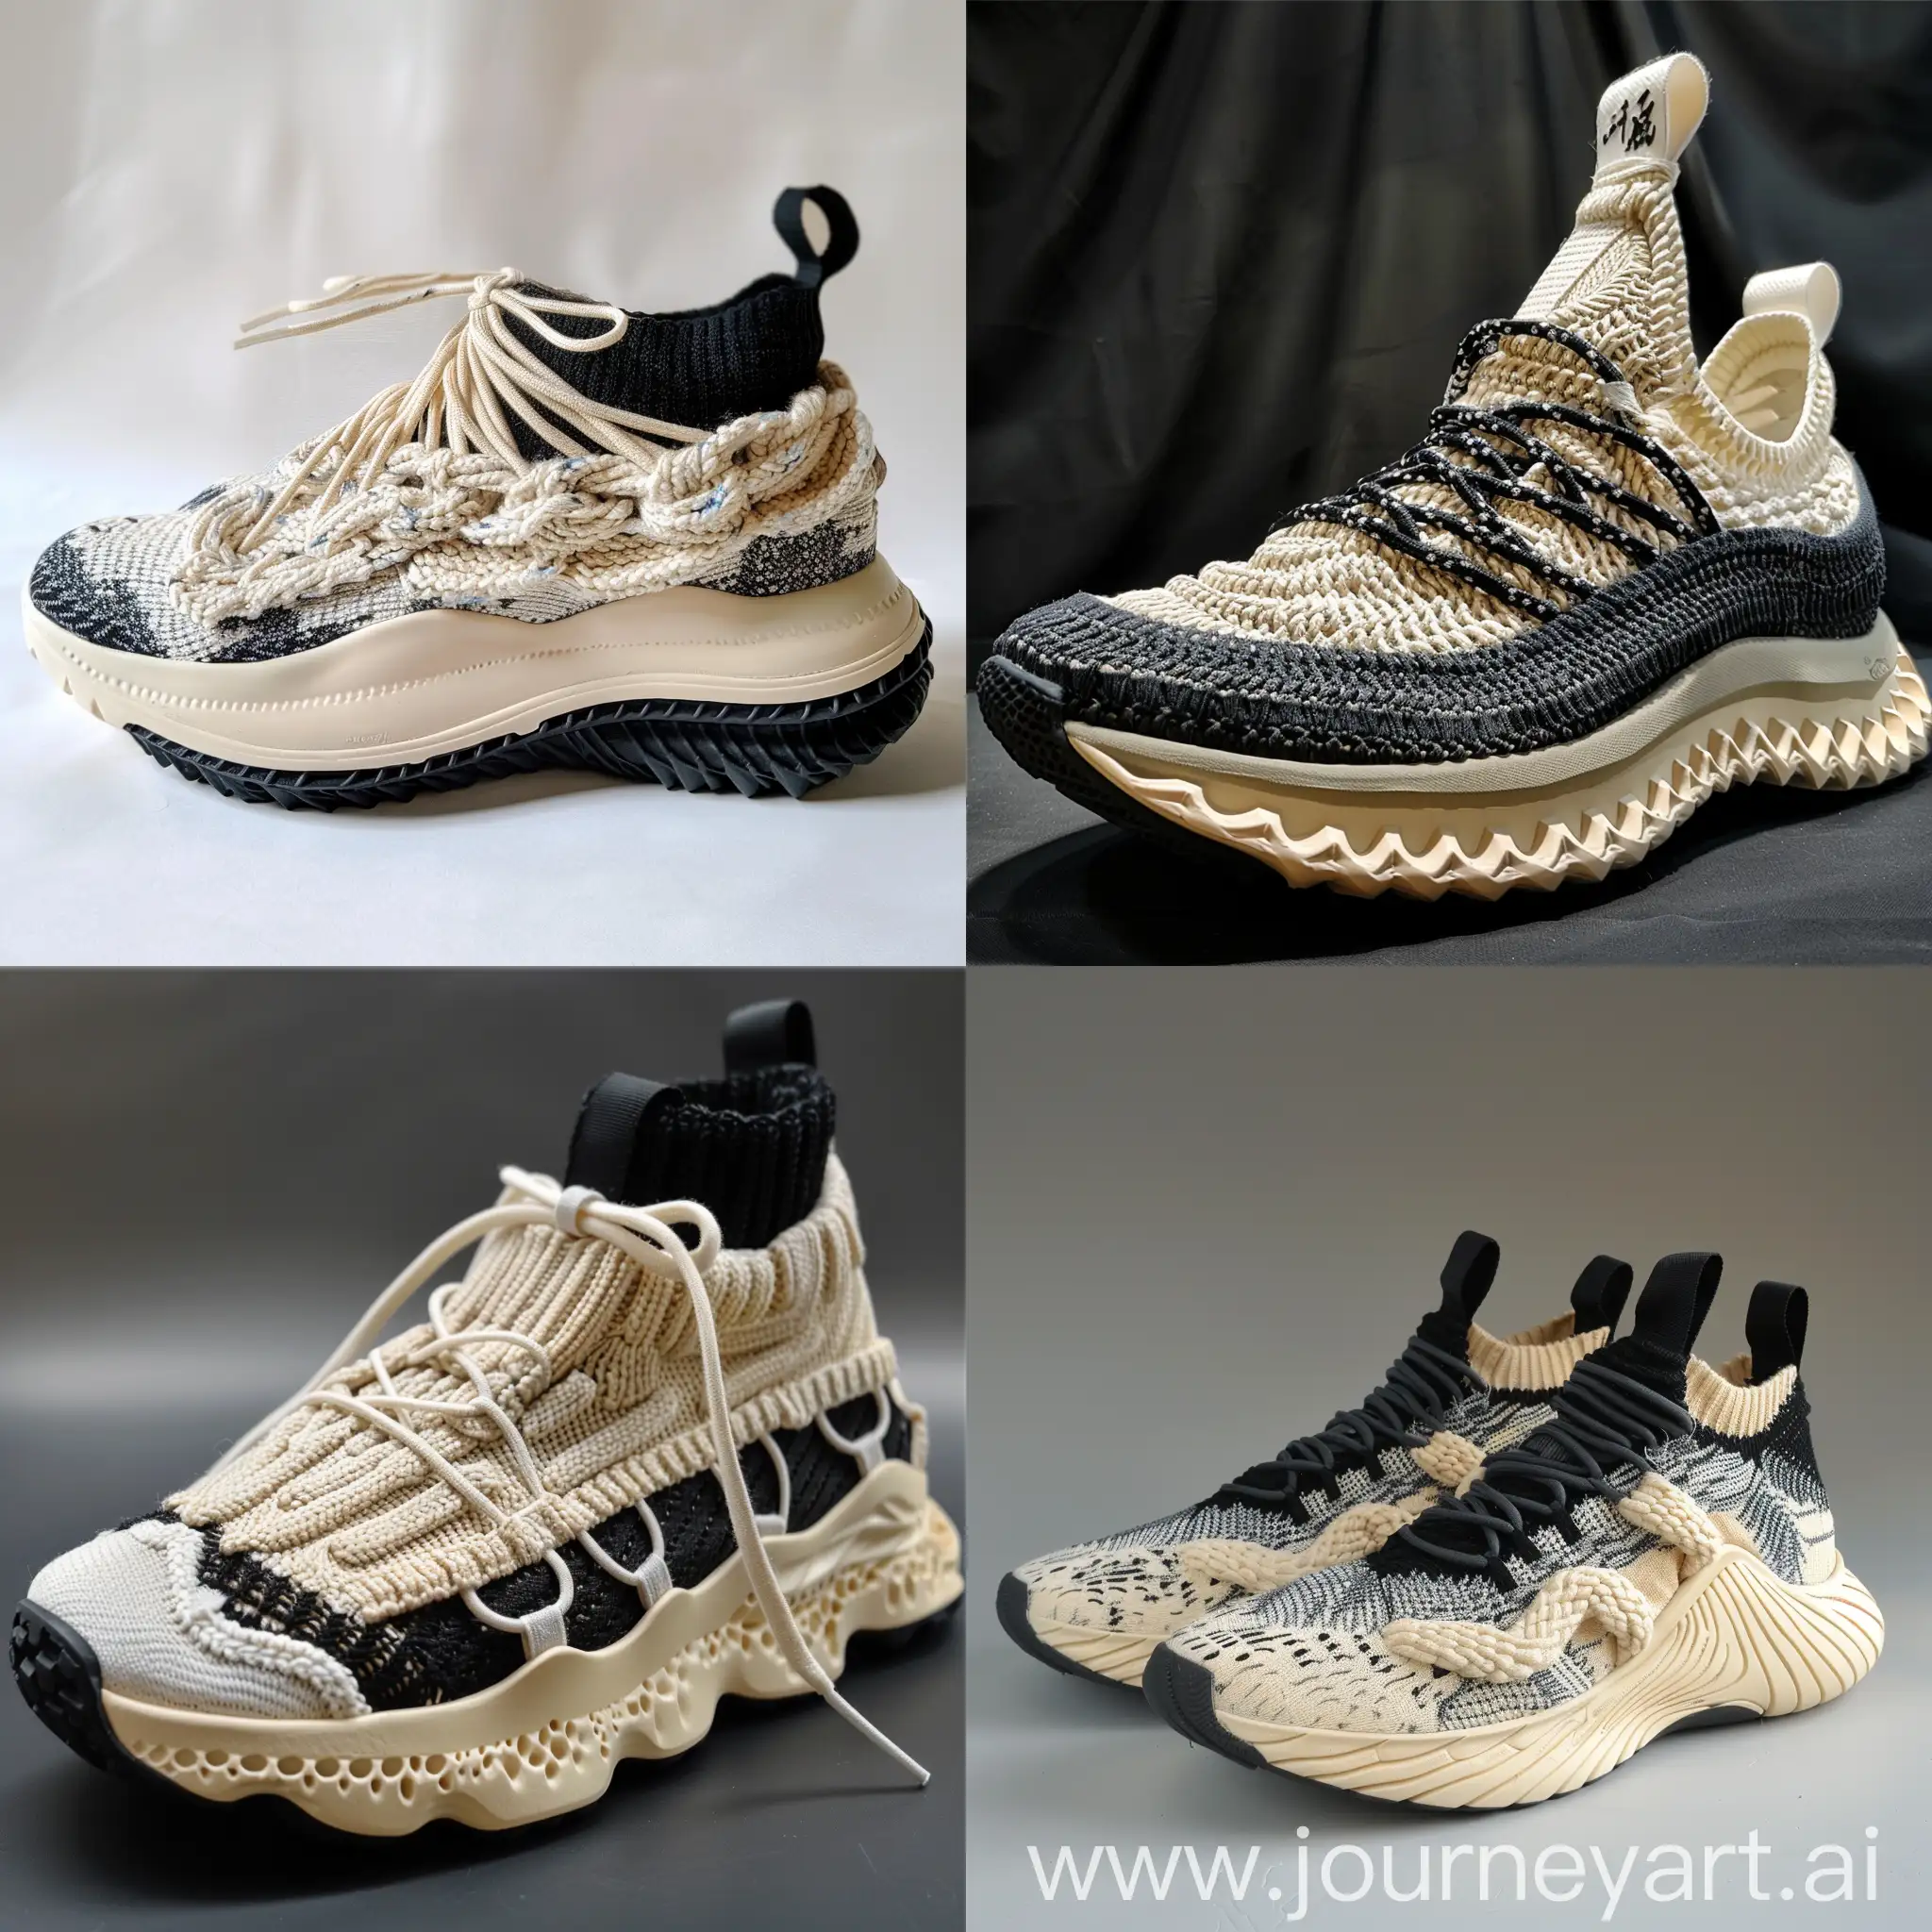 Sneakers design , inspired by peacock , cream color rubber midsole , knitted cables on midsole , some knitted cables on upper , upper color black and cream , low neck , black outsole , knitted laces